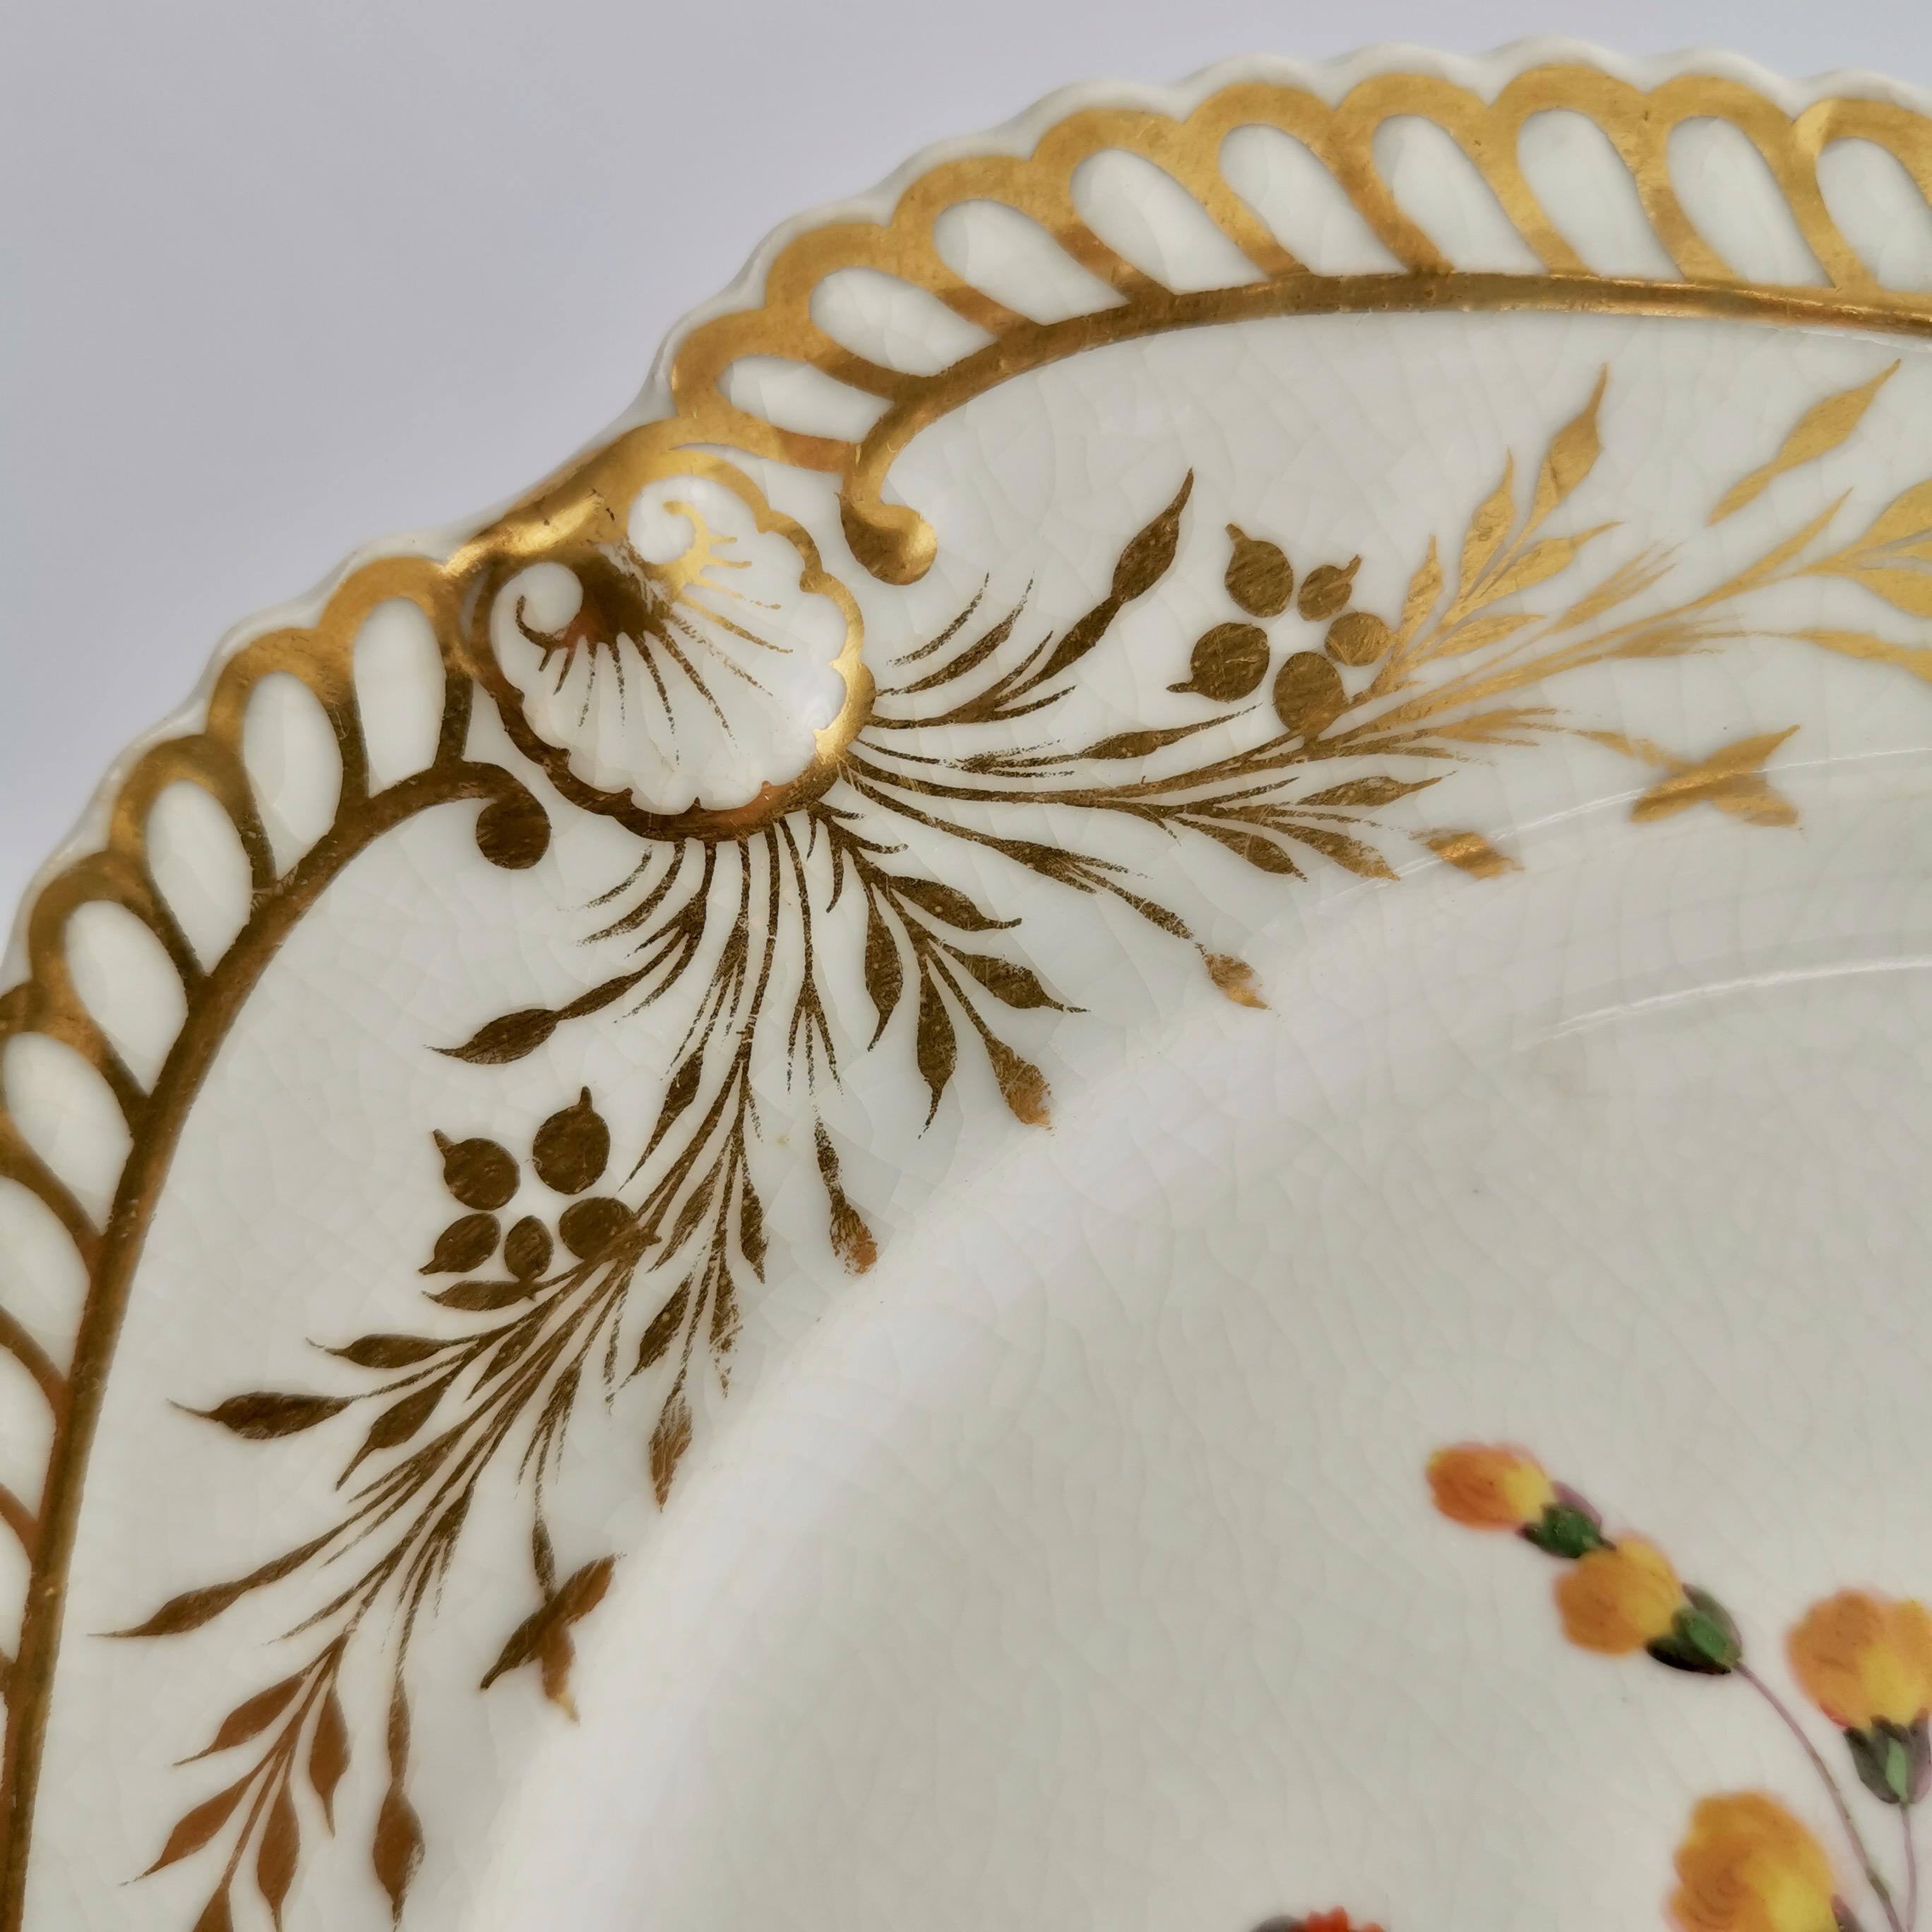 Hand-Painted Porcelain Plate, Chamberlains Worcester, White with Flowers, Regency ca 1822 '2'